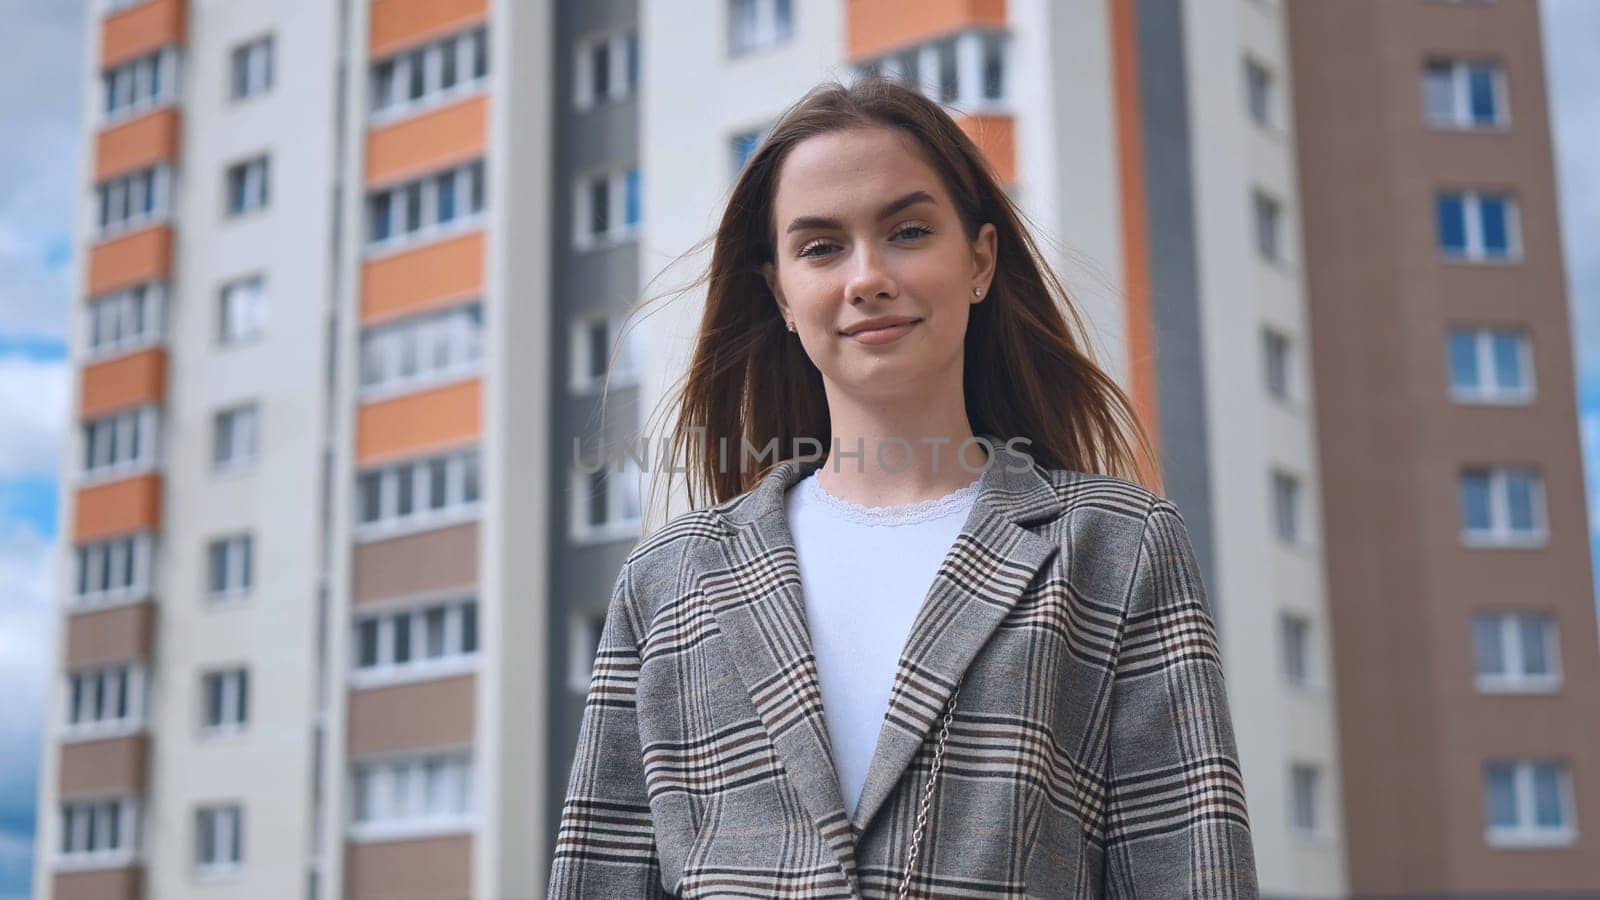 Portrait of a girl in front of a high-rise apartment building